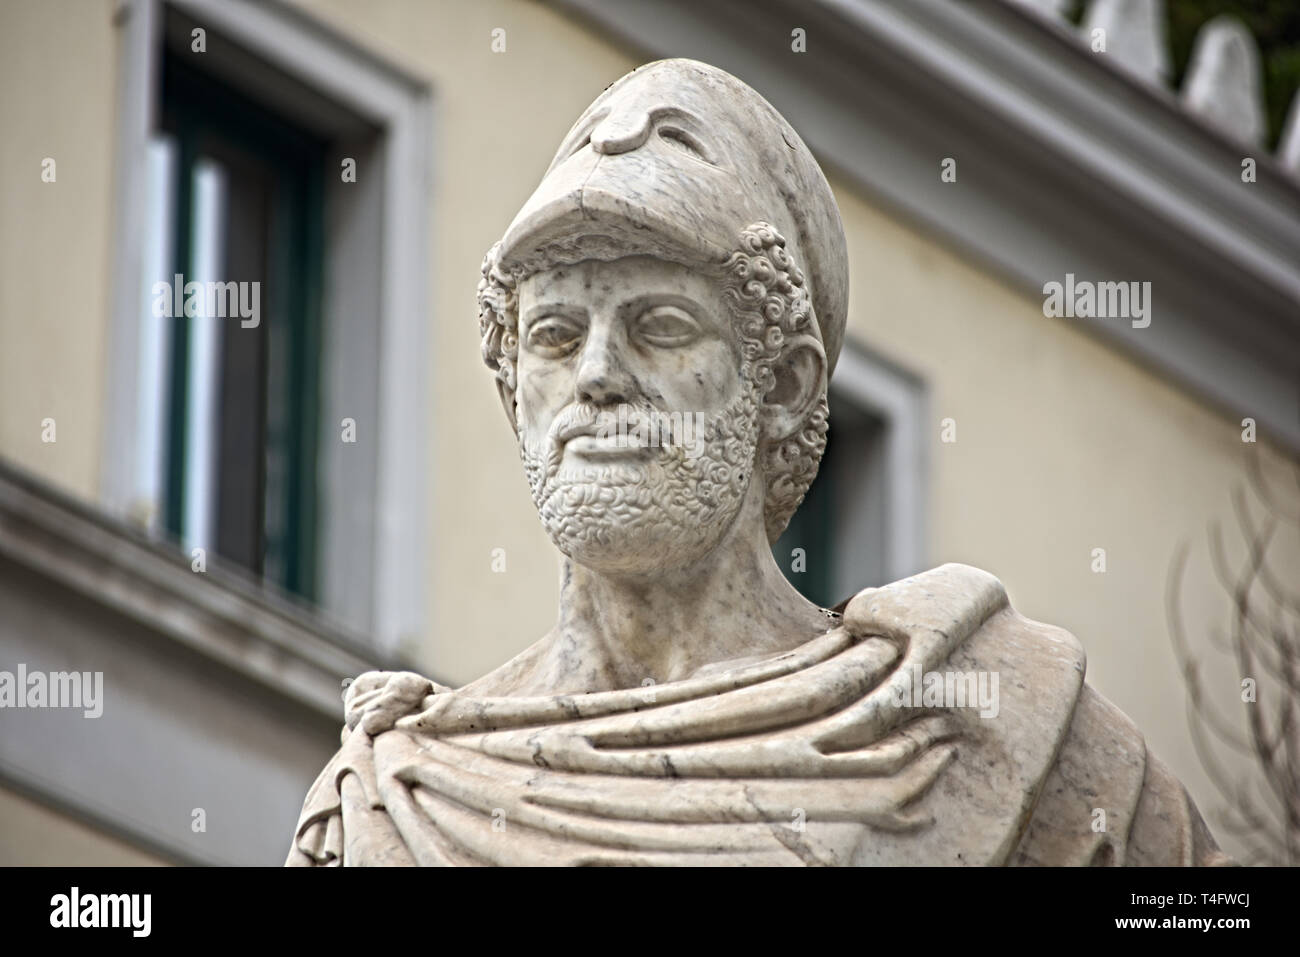 Statue of Pericles ('ΠΕΡΙΚΛΗΣ' means 'full of glory') in central Athens, Greece. By Faltermeier. Probably the only statue in Athens made by non-Greek. Stock Photo